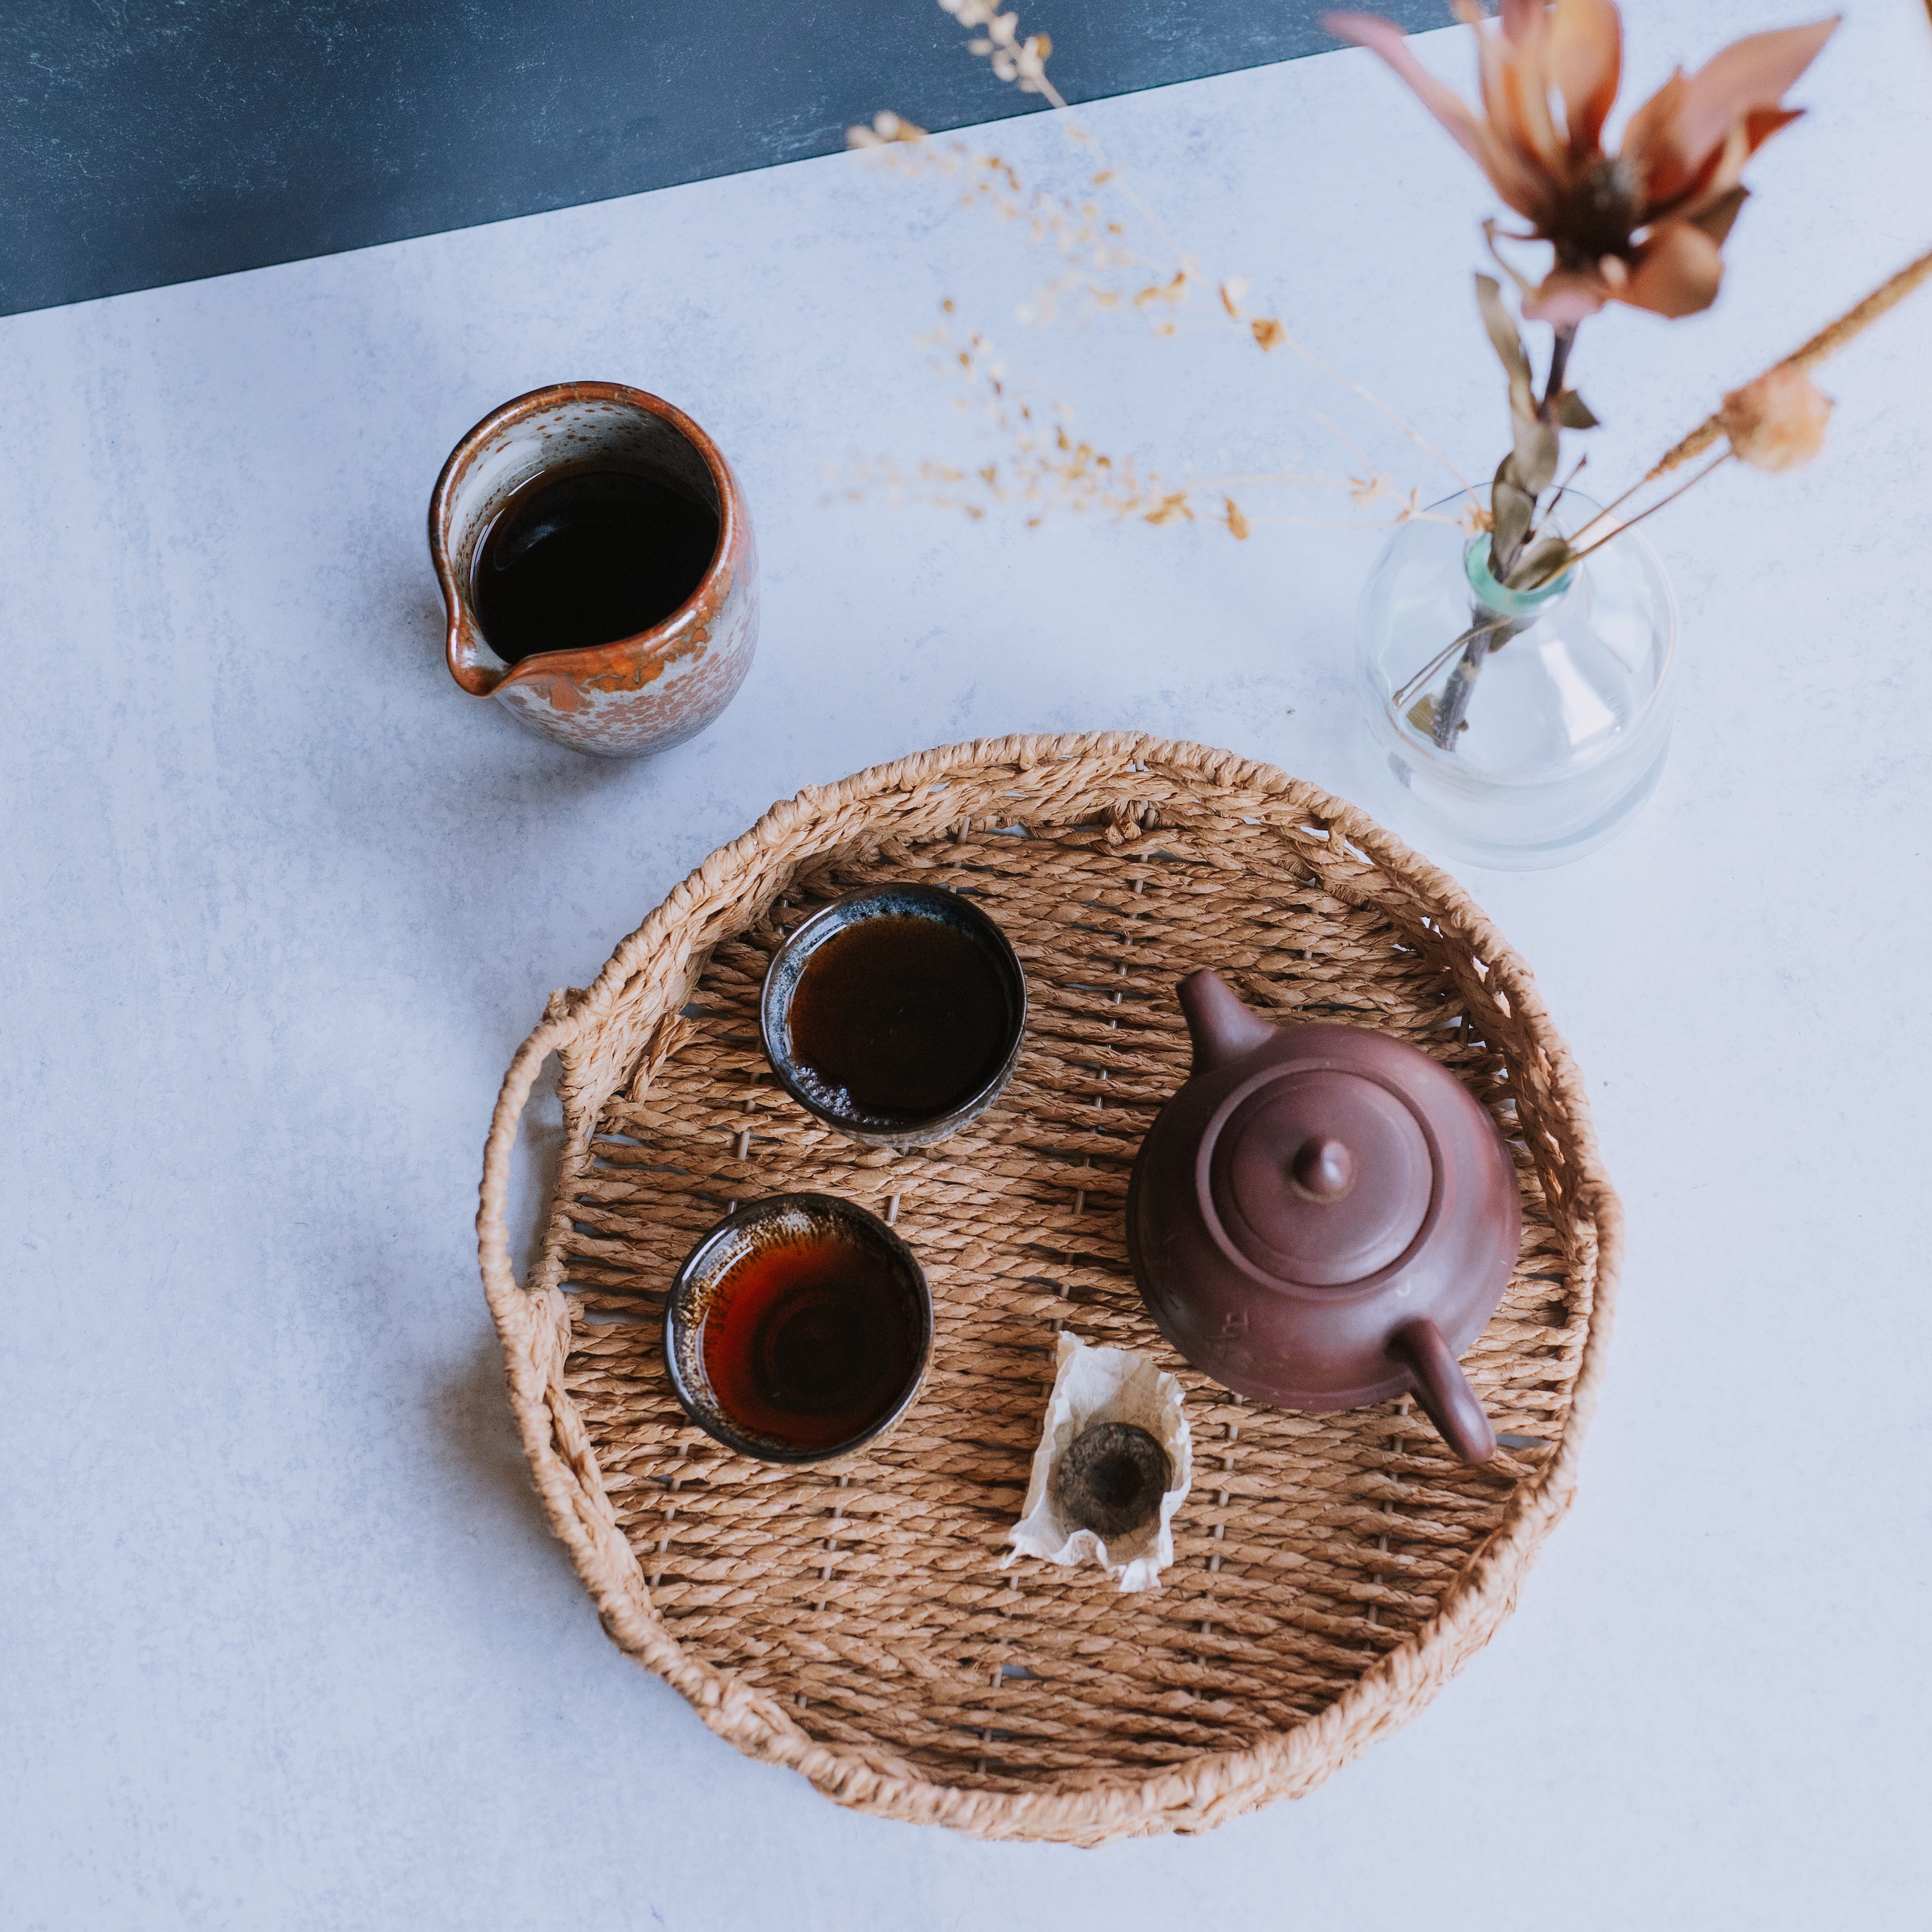 earthenware pitcher of brewed pu erh tea sitting next to a woven basket tray with two cups of pu erh, a yixing clay pot, and a mini toucha of 2012 Menghai tea